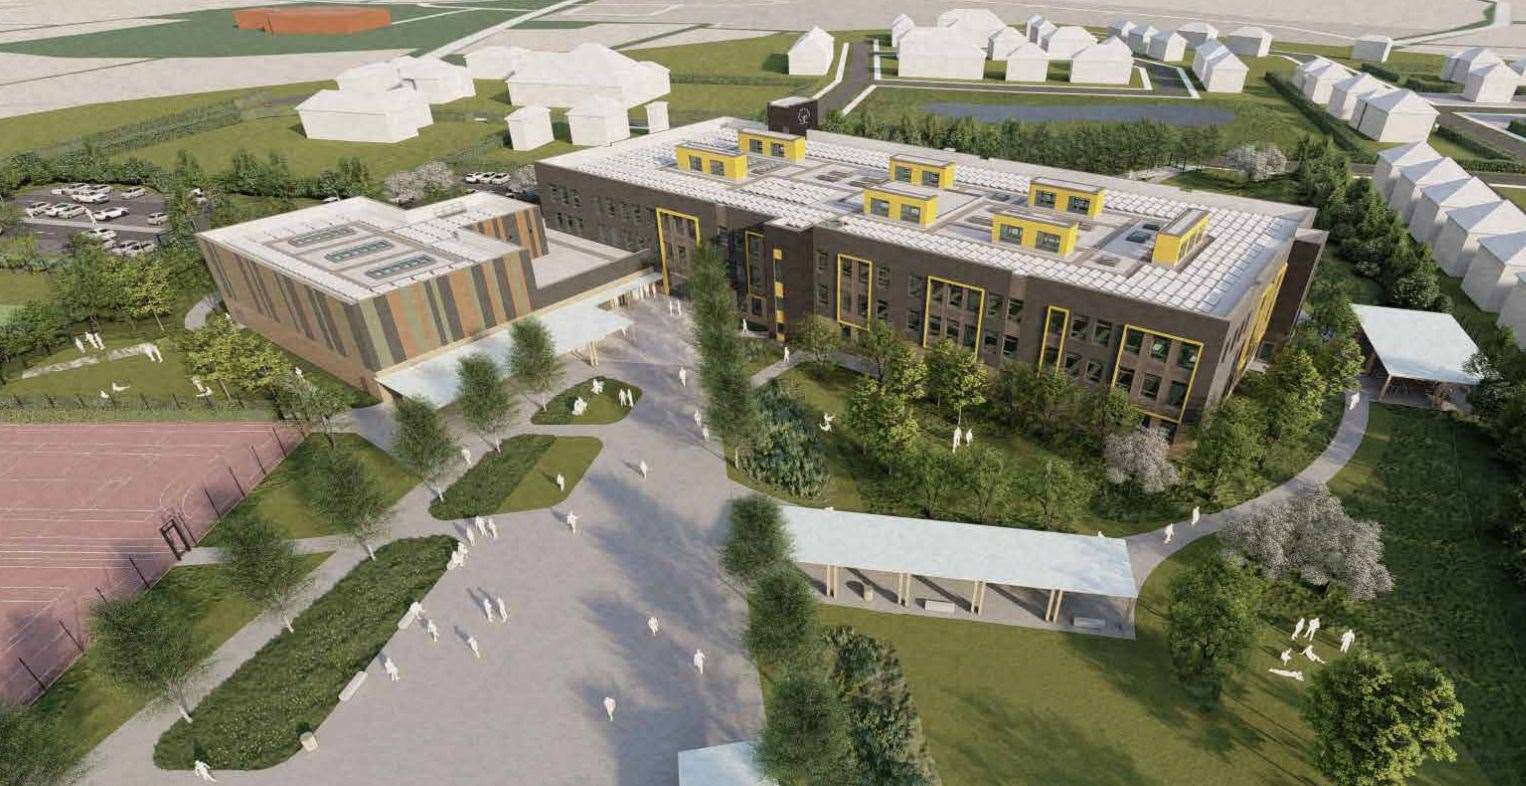 Chilmington Green Secondary School is part of a wider masterplan for the ‘garden town’